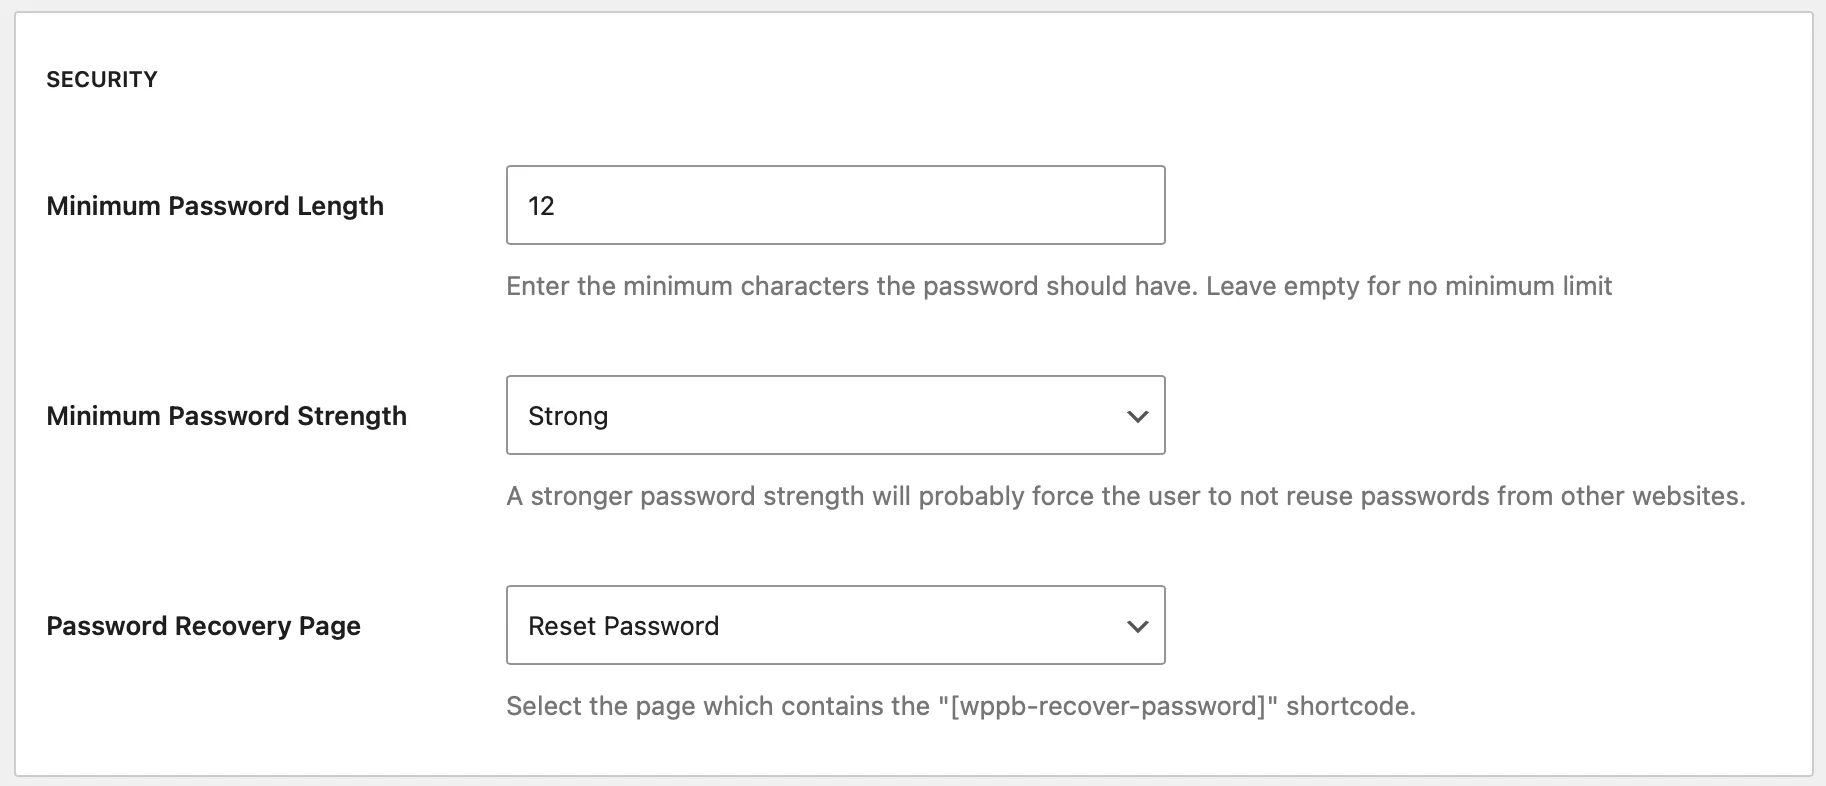 password security settings on Profile Builder